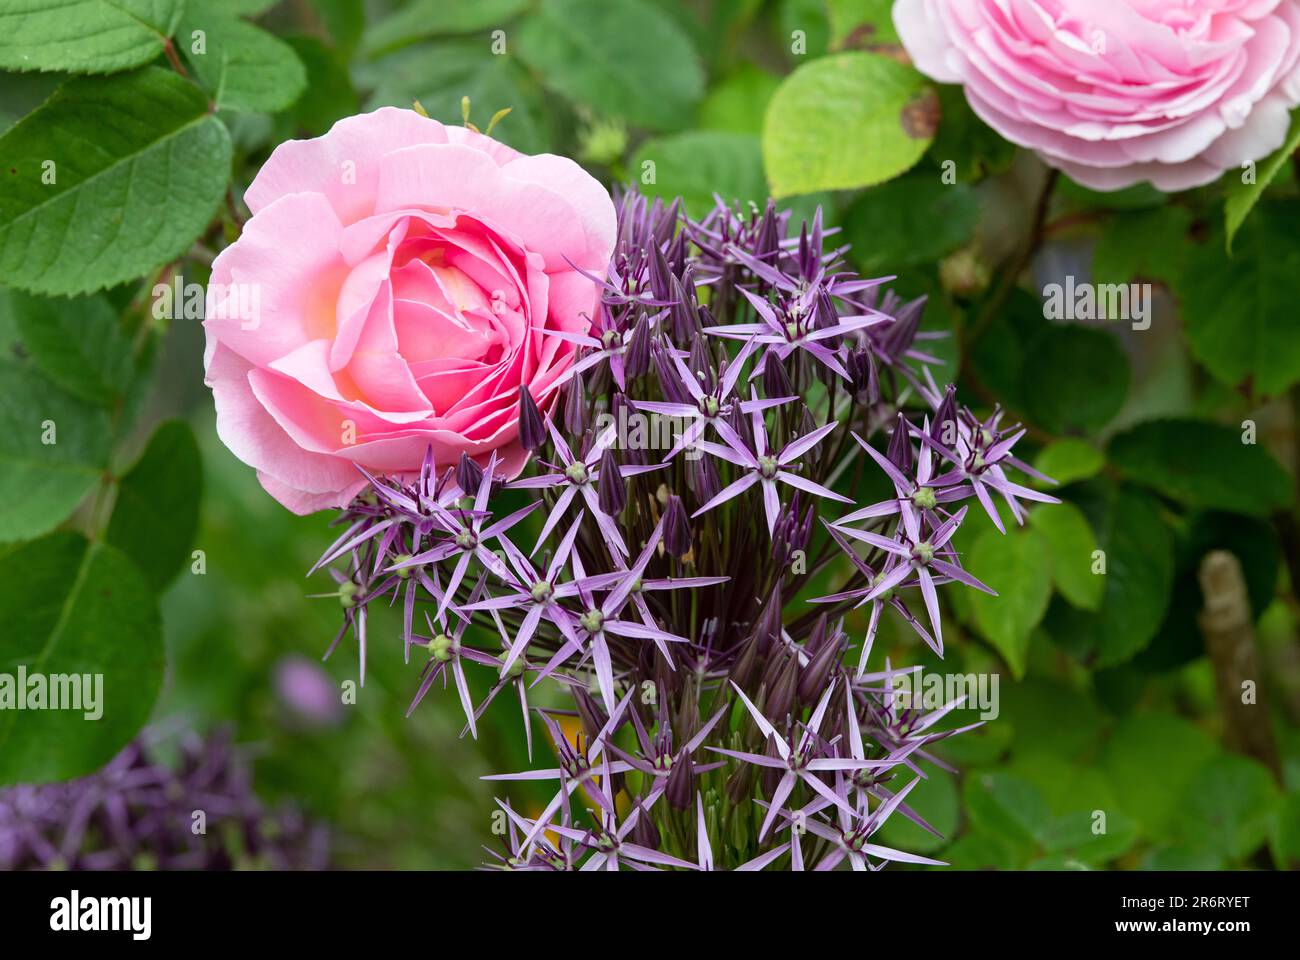 Allium christophii and pink rose in an english garden Stock Photo